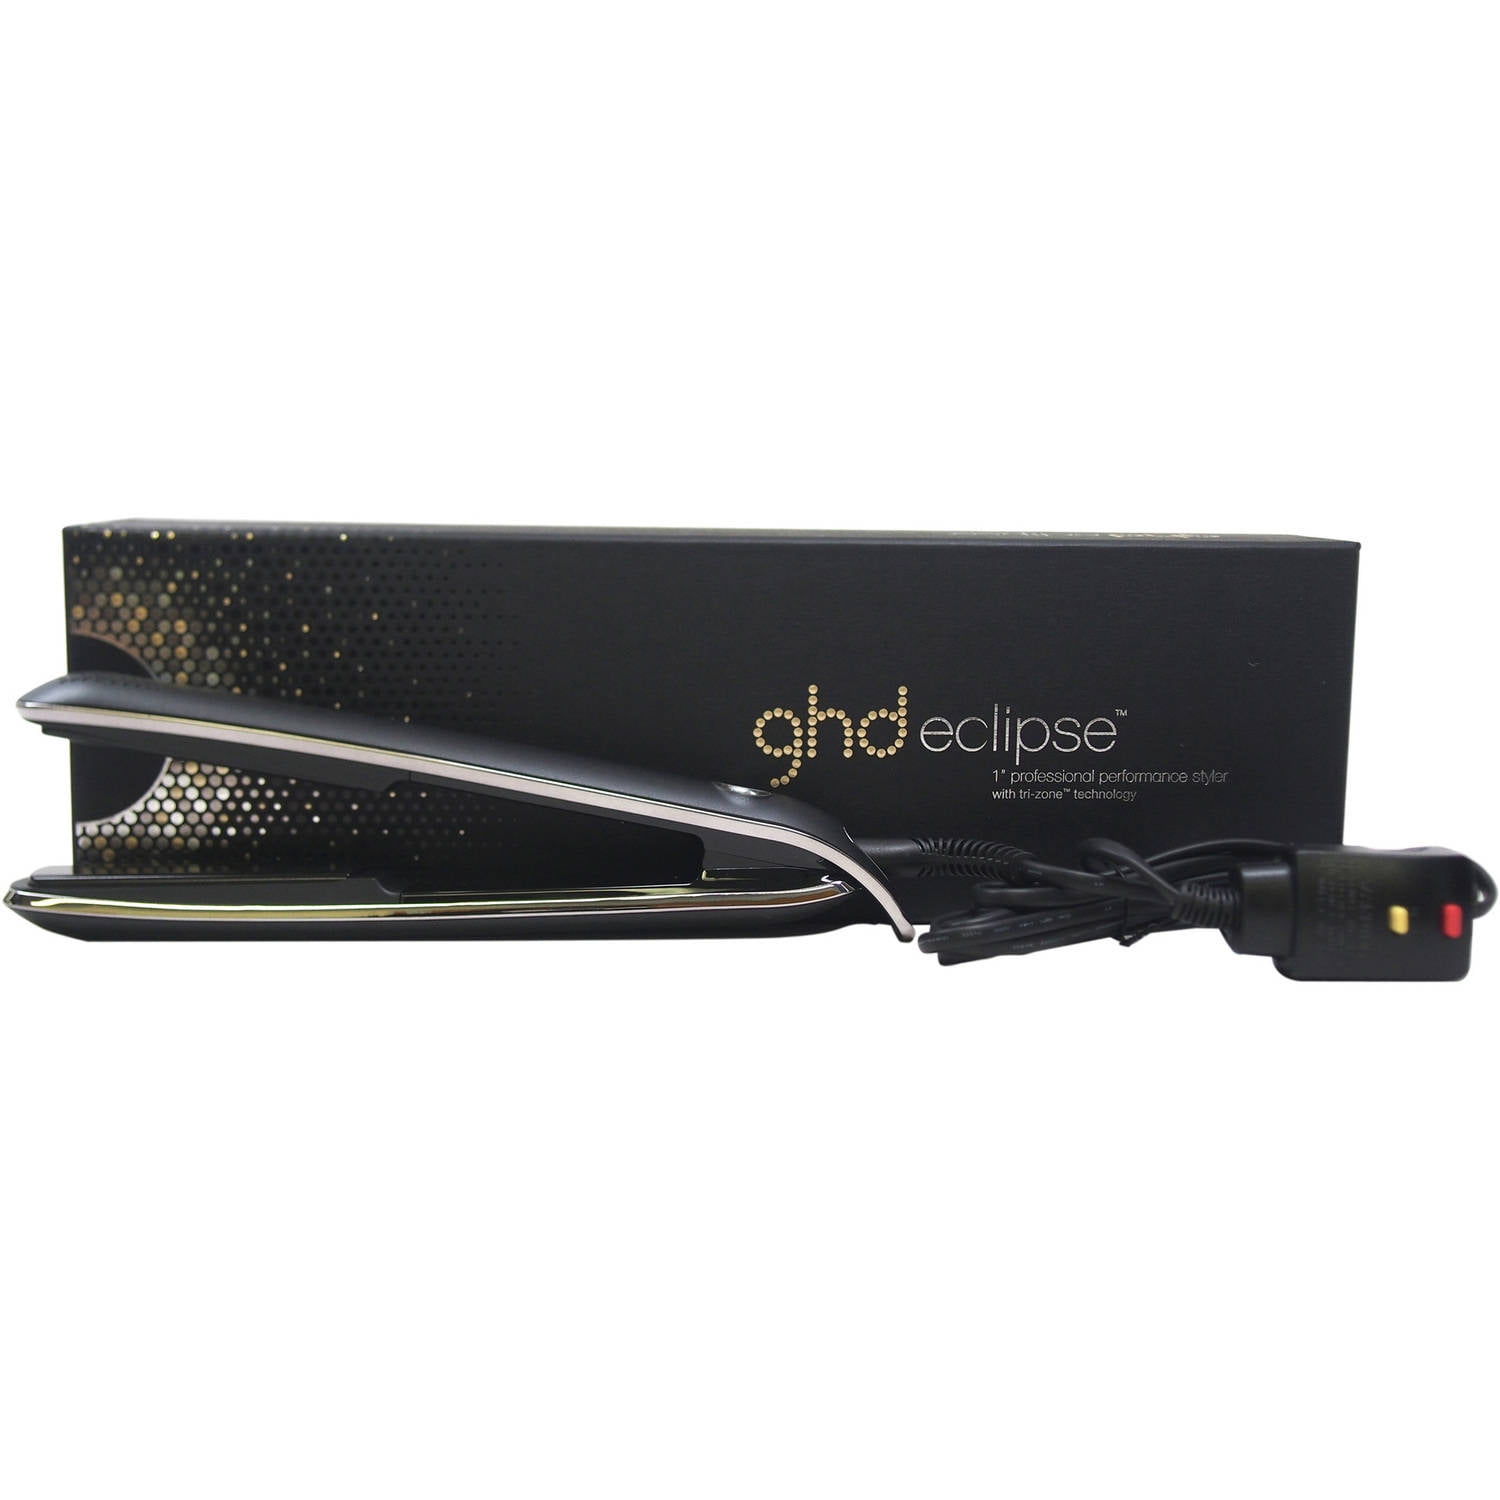 GHD Eclipse Professional Performance Styler Tri-Zone Technology Flat Iron-Black  by GHD for Unisex, 1